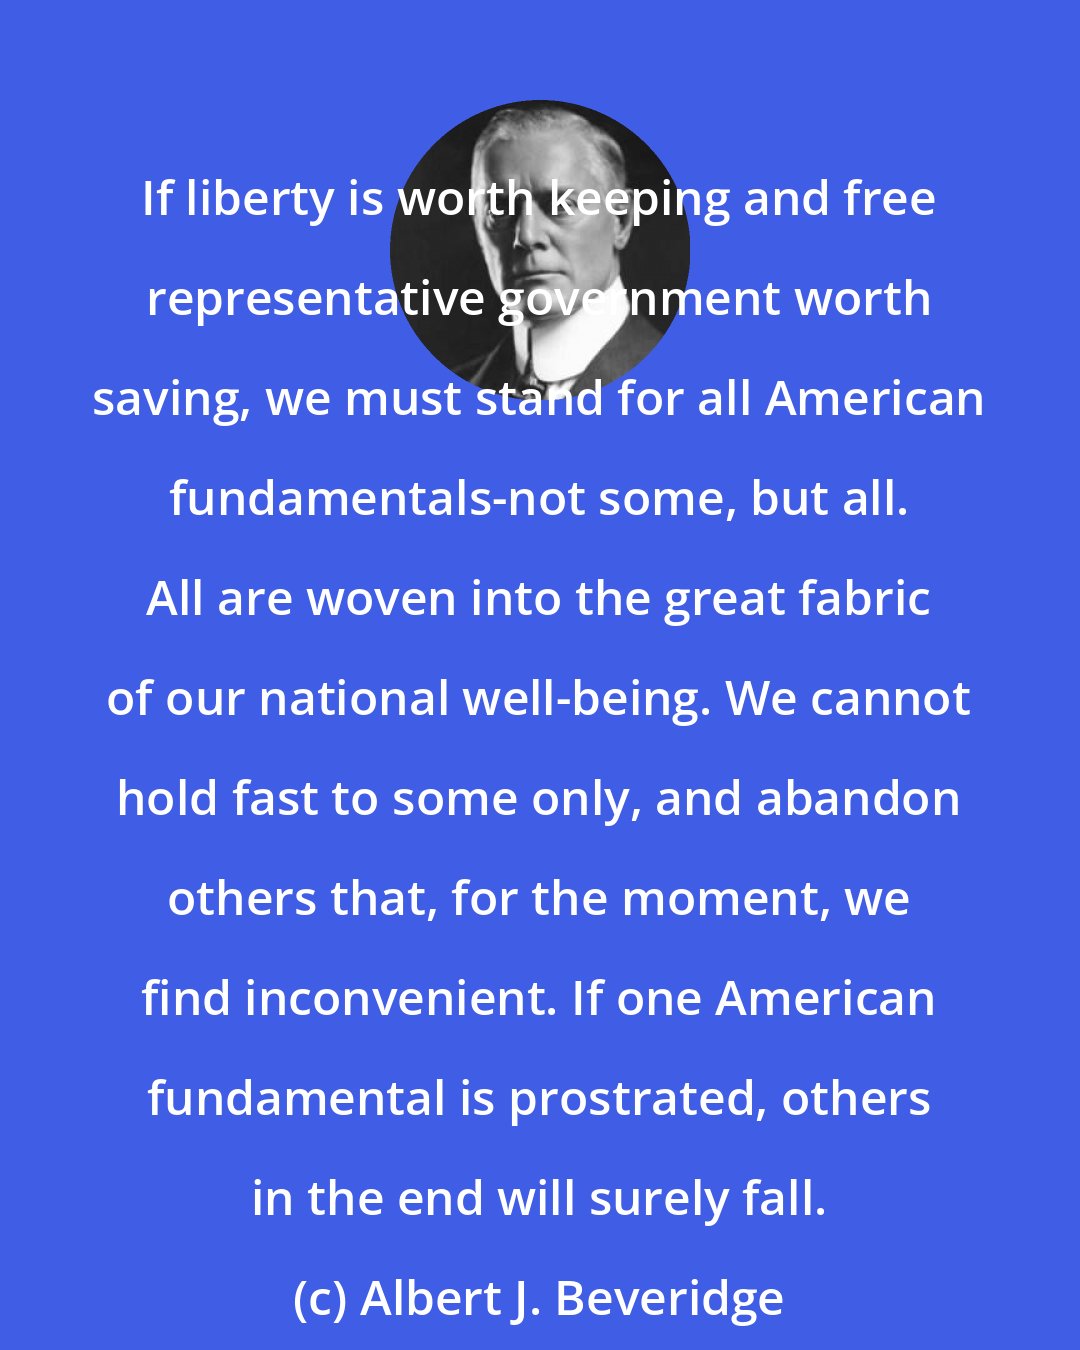 Albert J. Beveridge: If liberty is worth keeping and free representative government worth saving, we must stand for all American fundamentals-not some, but all. All are woven into the great fabric of our national well-being. We cannot hold fast to some only, and abandon others that, for the moment, we find inconvenient. If one American fundamental is prostrated, others in the end will surely fall.